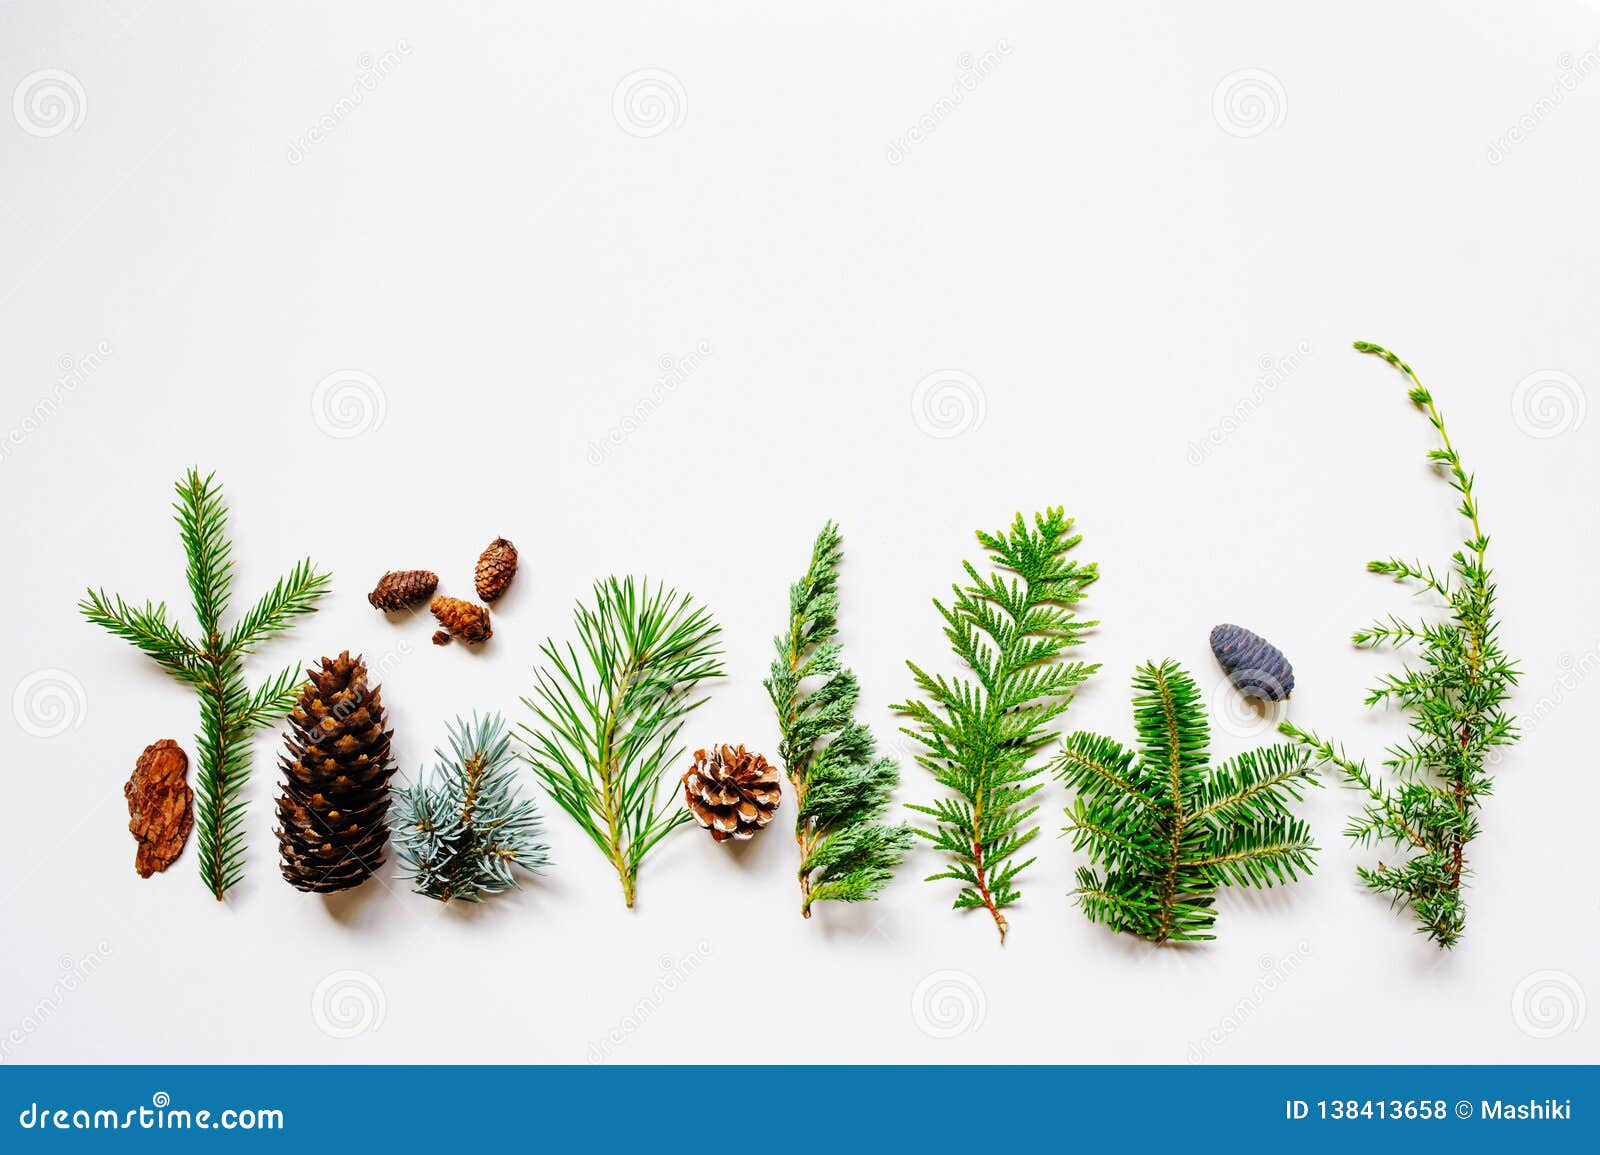 Collection of Various Conifers and Its Cones on White Backround. Stock ...